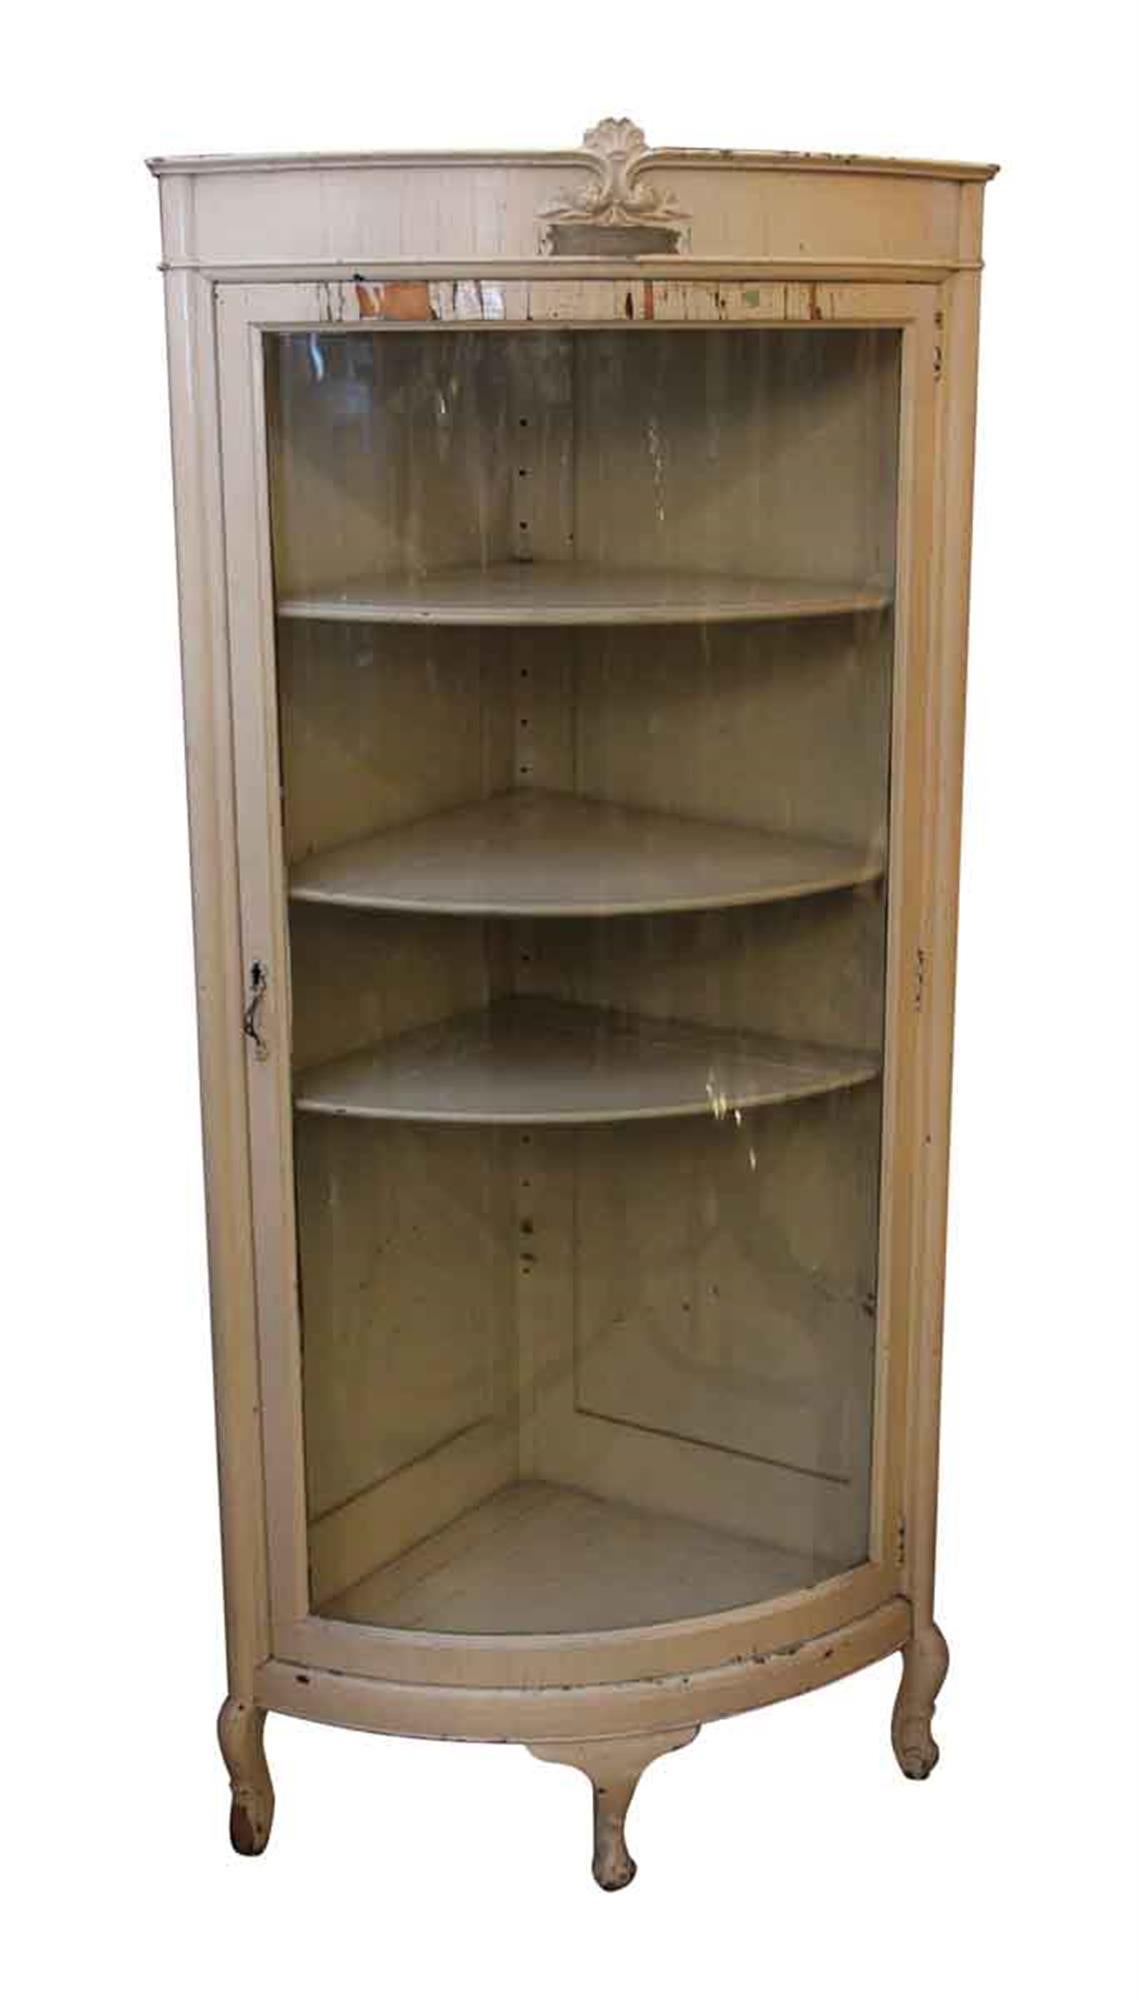 Painted white wooden cabinet with a glass front and three legs. The inside has three shelves. The top is stamped 